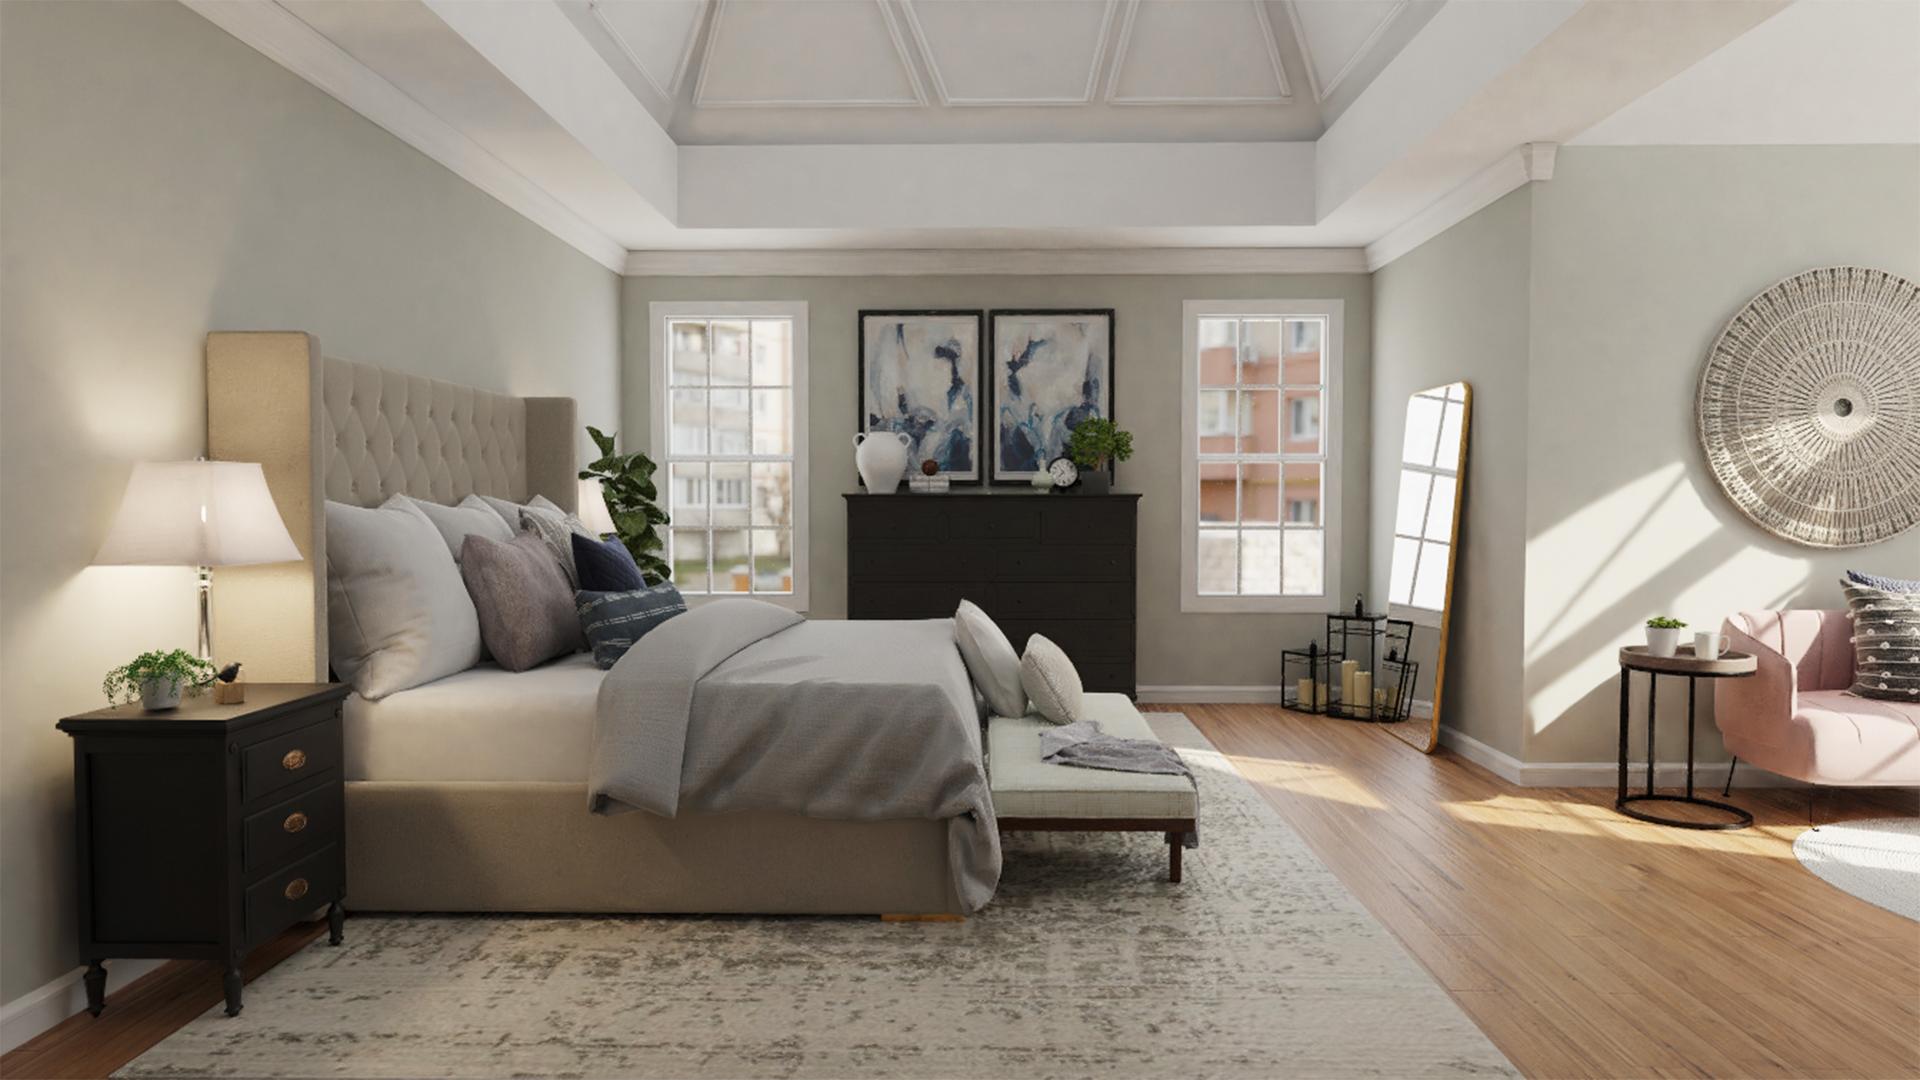 A Spacious Transitional Bedroom Bursting With Gray Tones